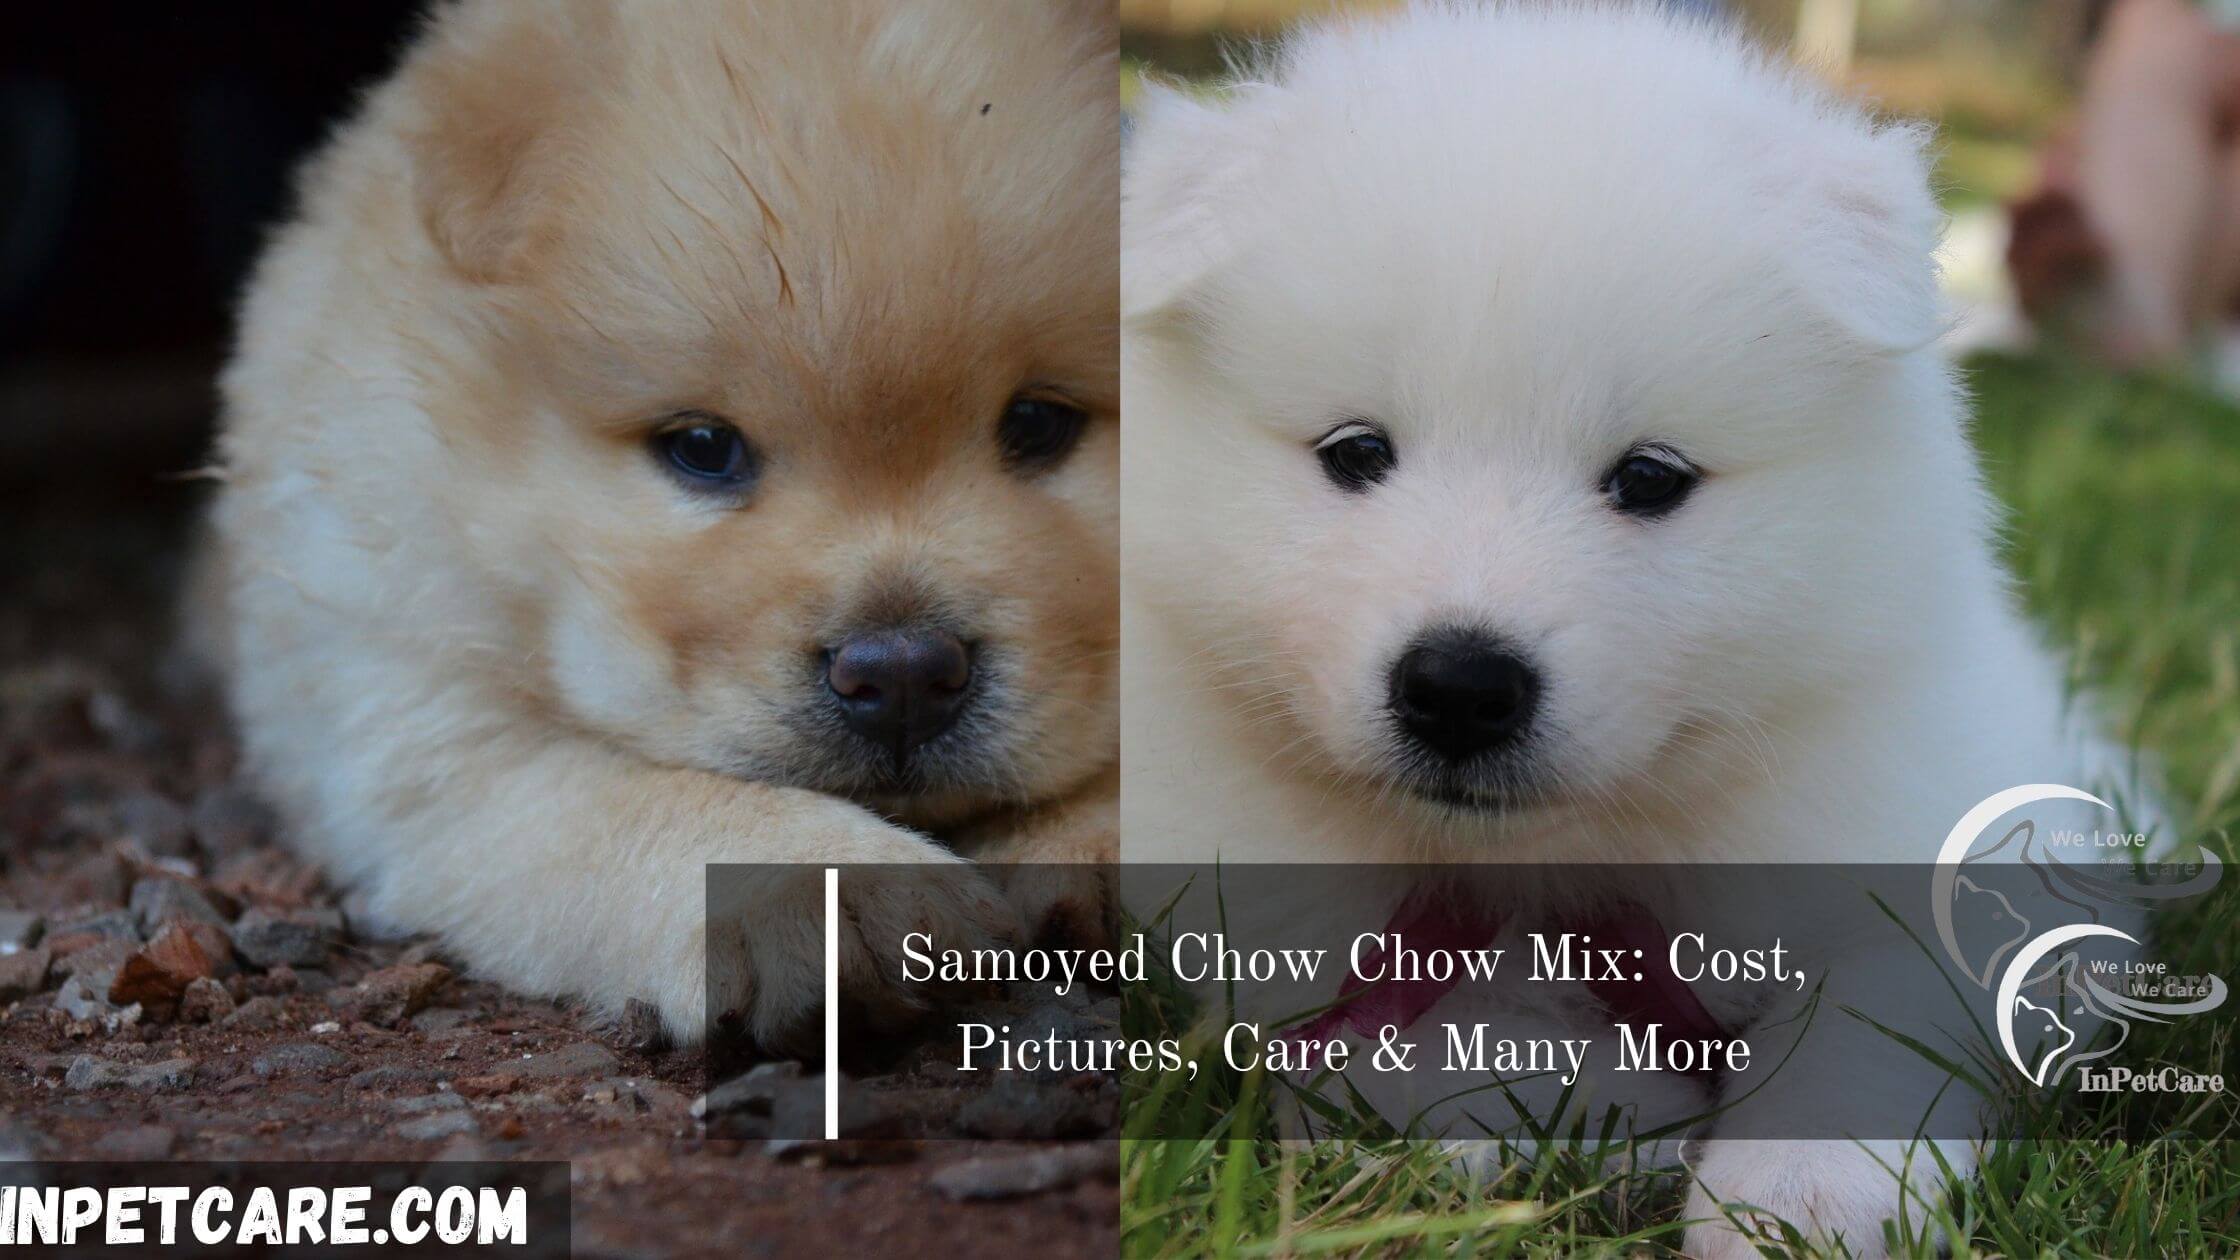 Samoyed Chow Chow Mix: Cost, Pictures, Care & More